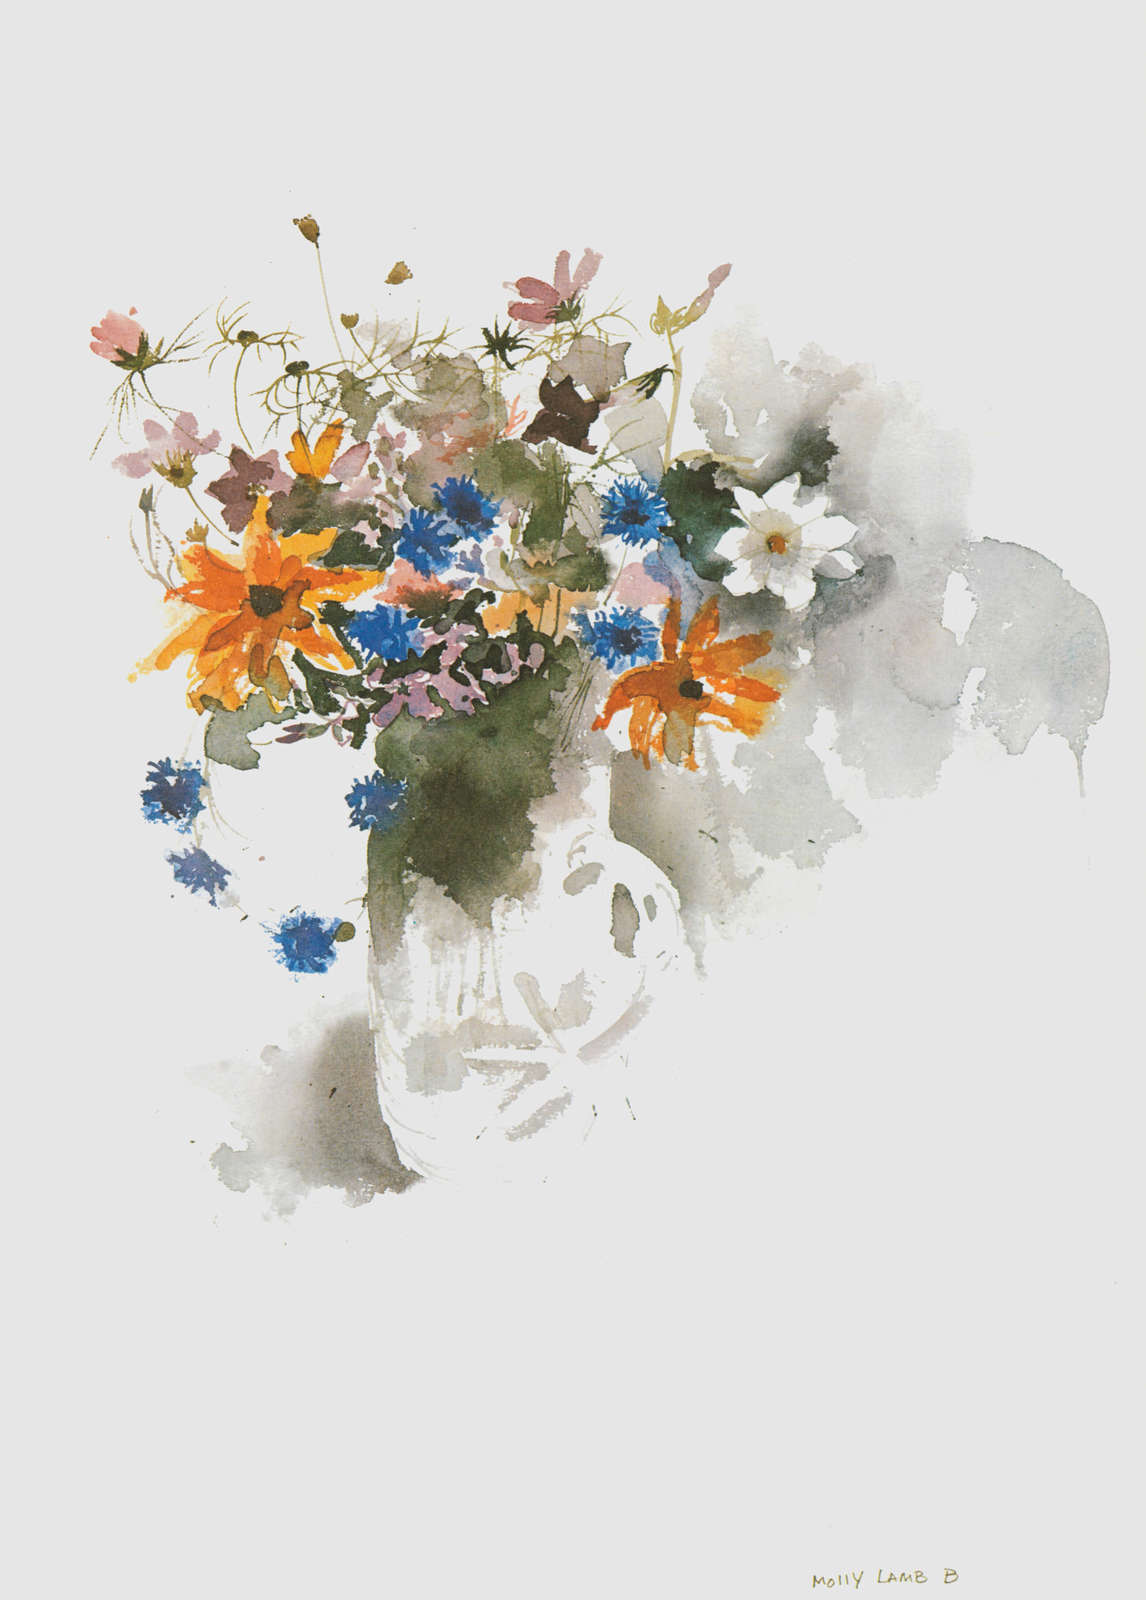 Molly Lamb Bobak, “A Jug of August Flowers,” from Wild Flowers of Canada: Impressions and Sketches of a Field Artist